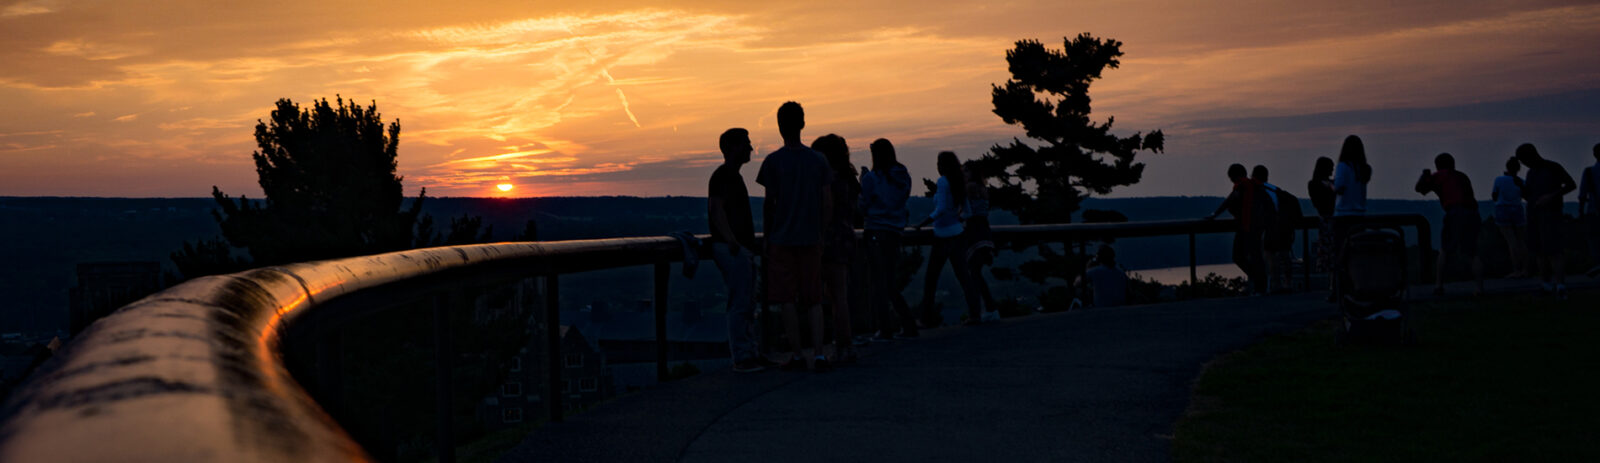 A landscape image of students at sunset talking in a group.